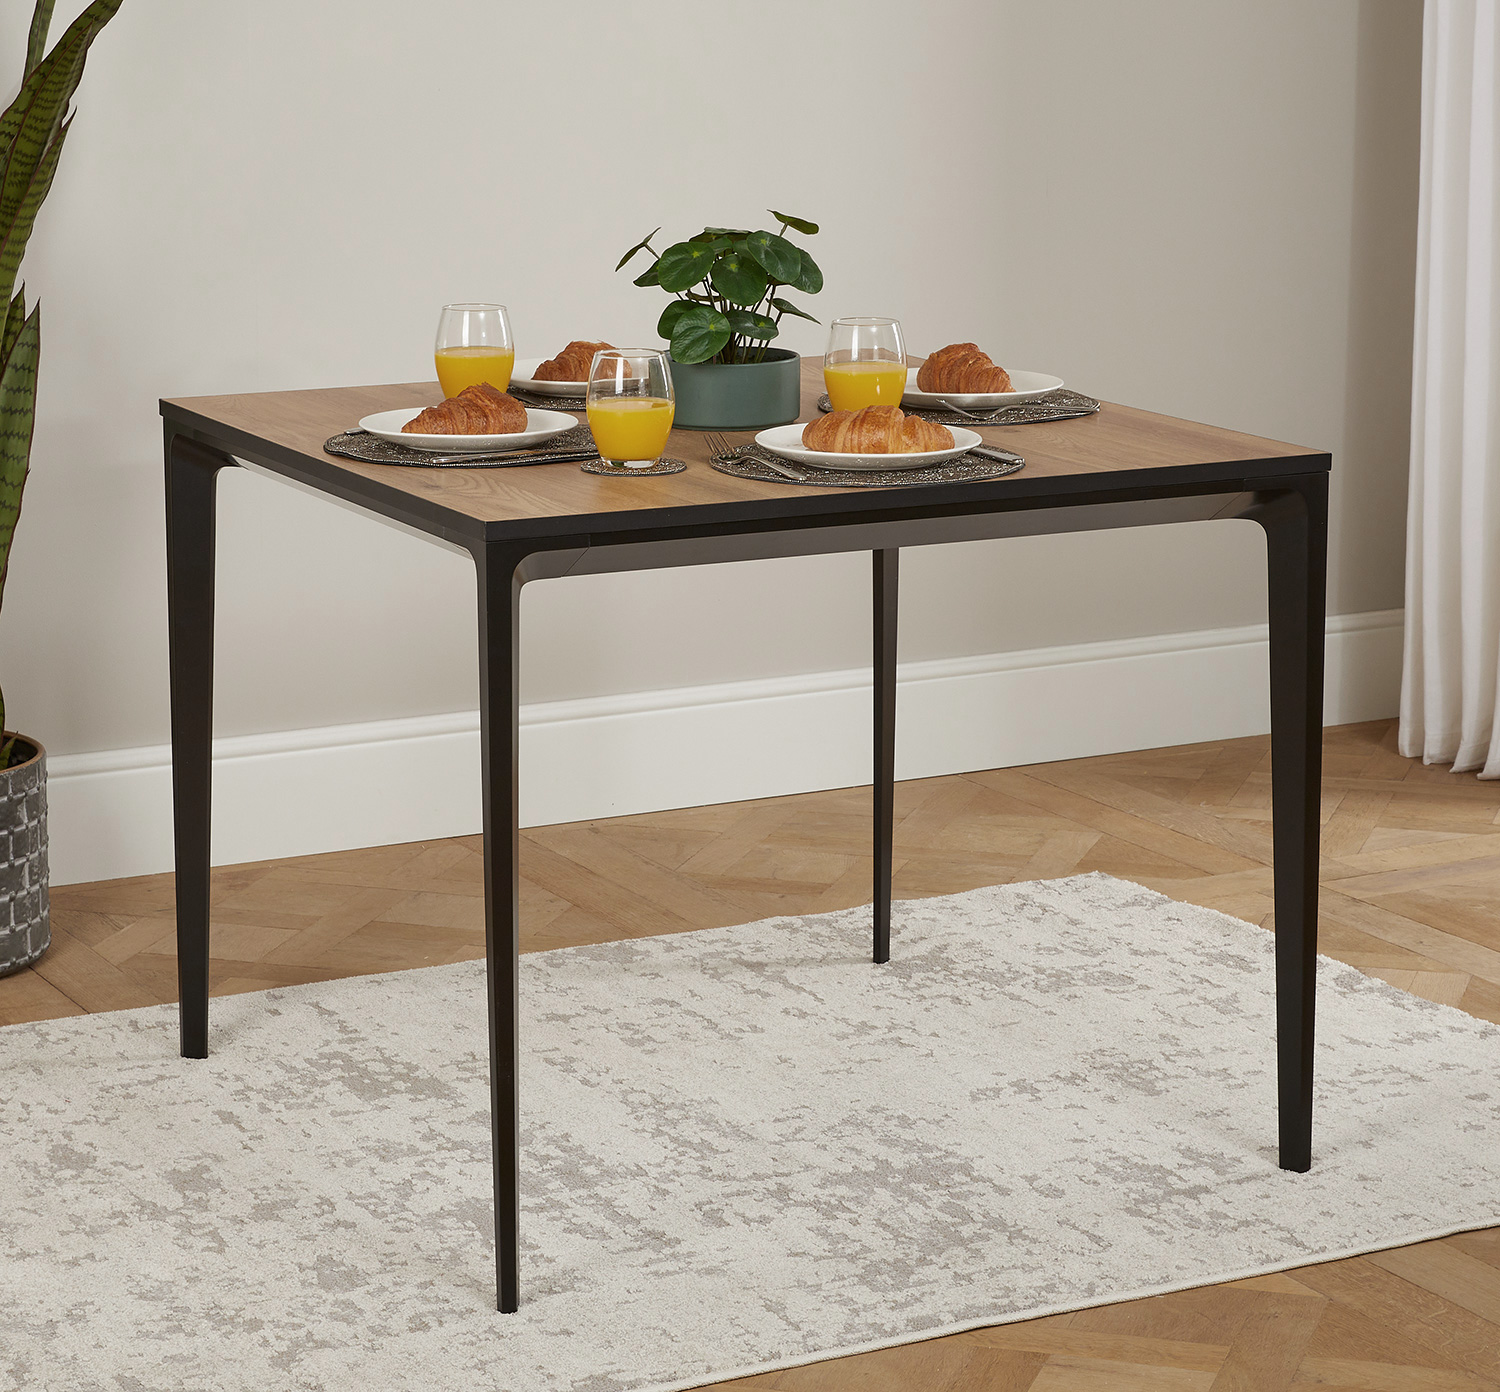 Bellagio 90cm Natural Oak Melamine Square Dining Table with Black Contemporary Base